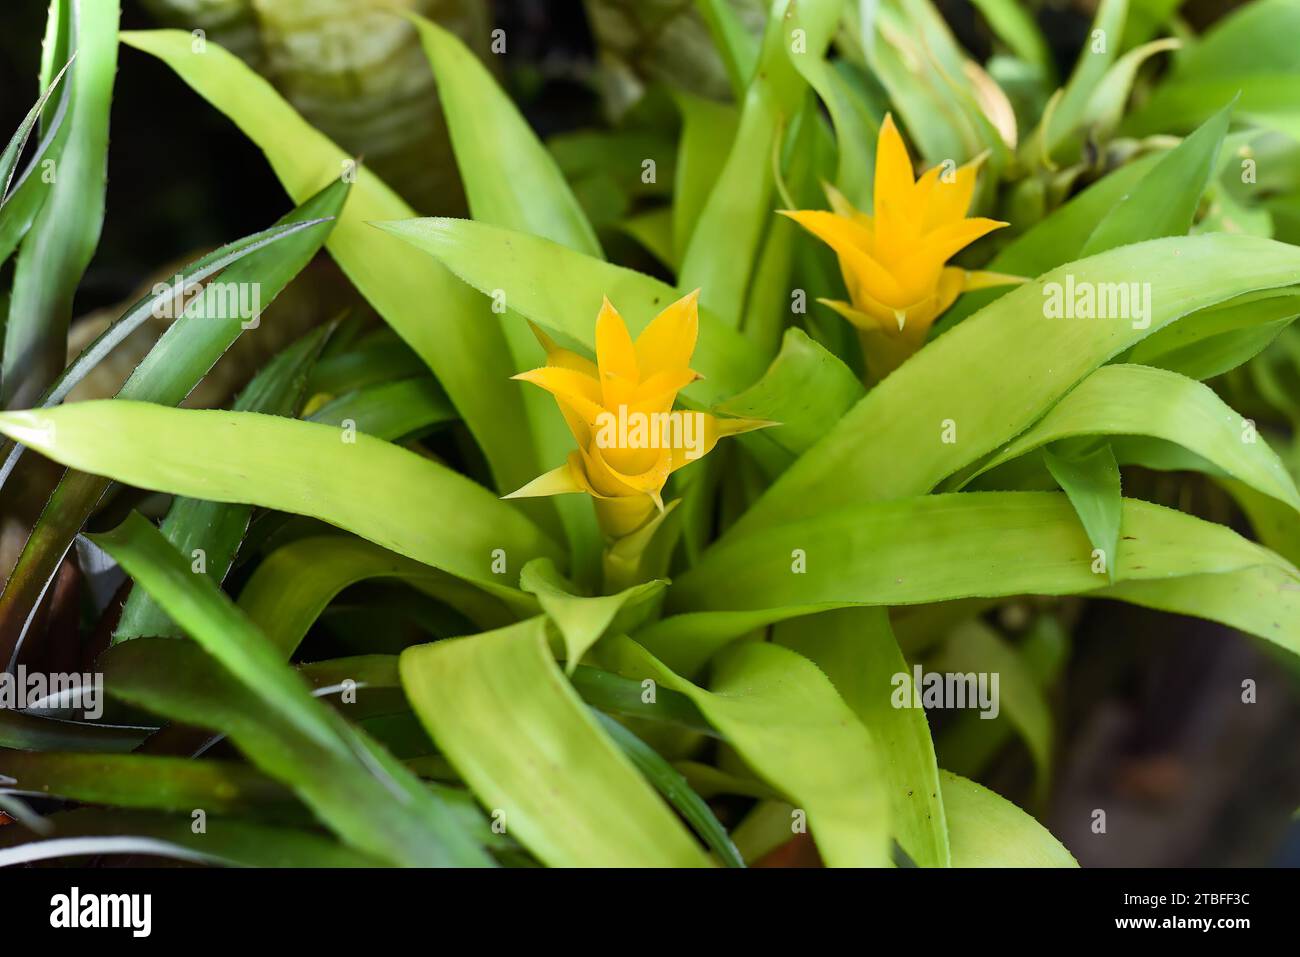 Canistropsis yellow flower close up Stock Photo